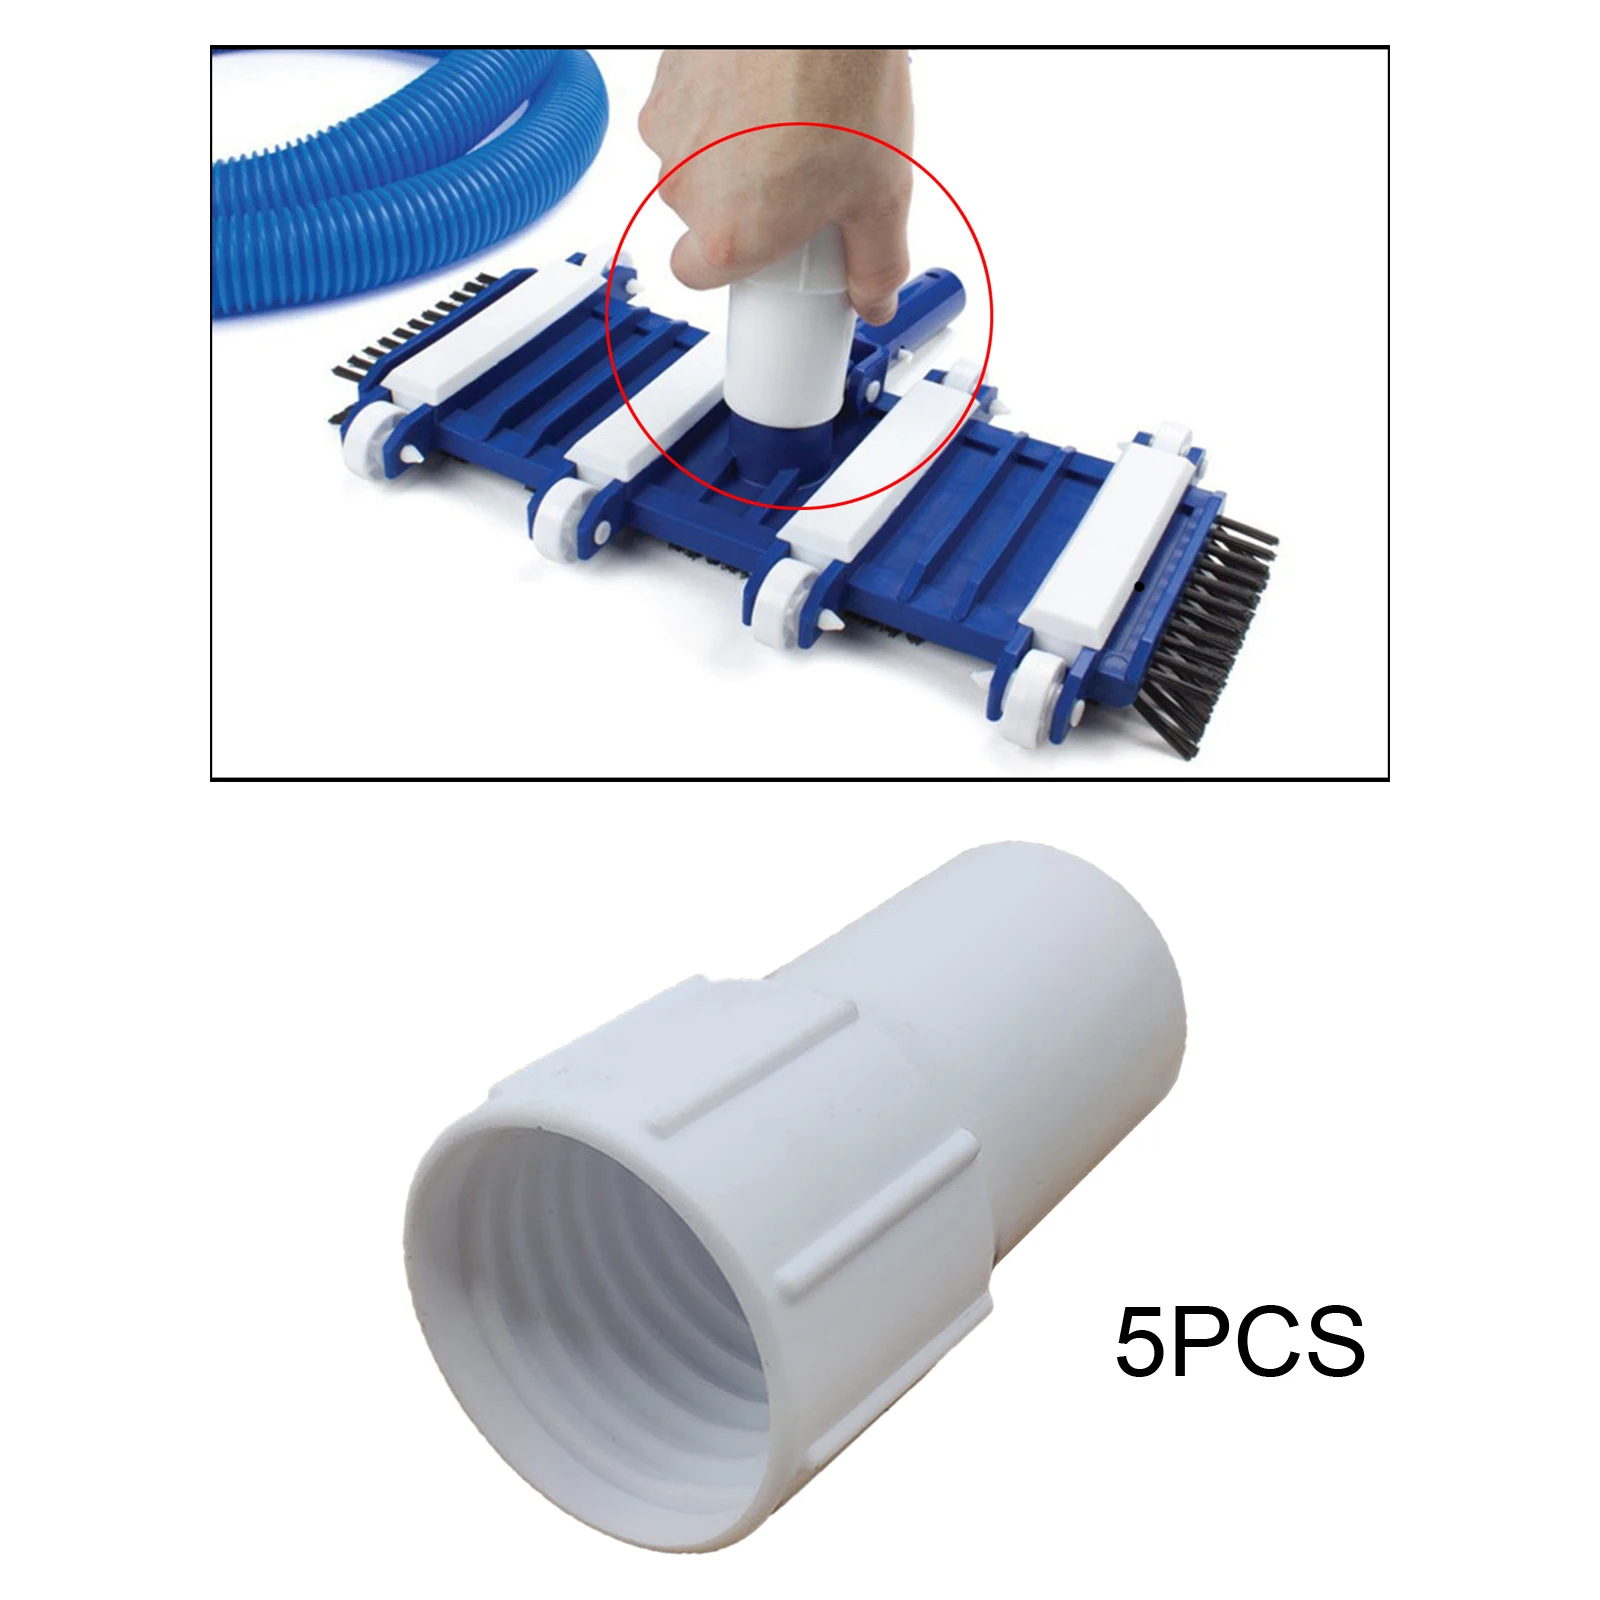 Plastic 5pcs Swimming Pool Vacuum Hose Cuffs, Hose End Connector Durable Swimming Pool Replacement Cuffs